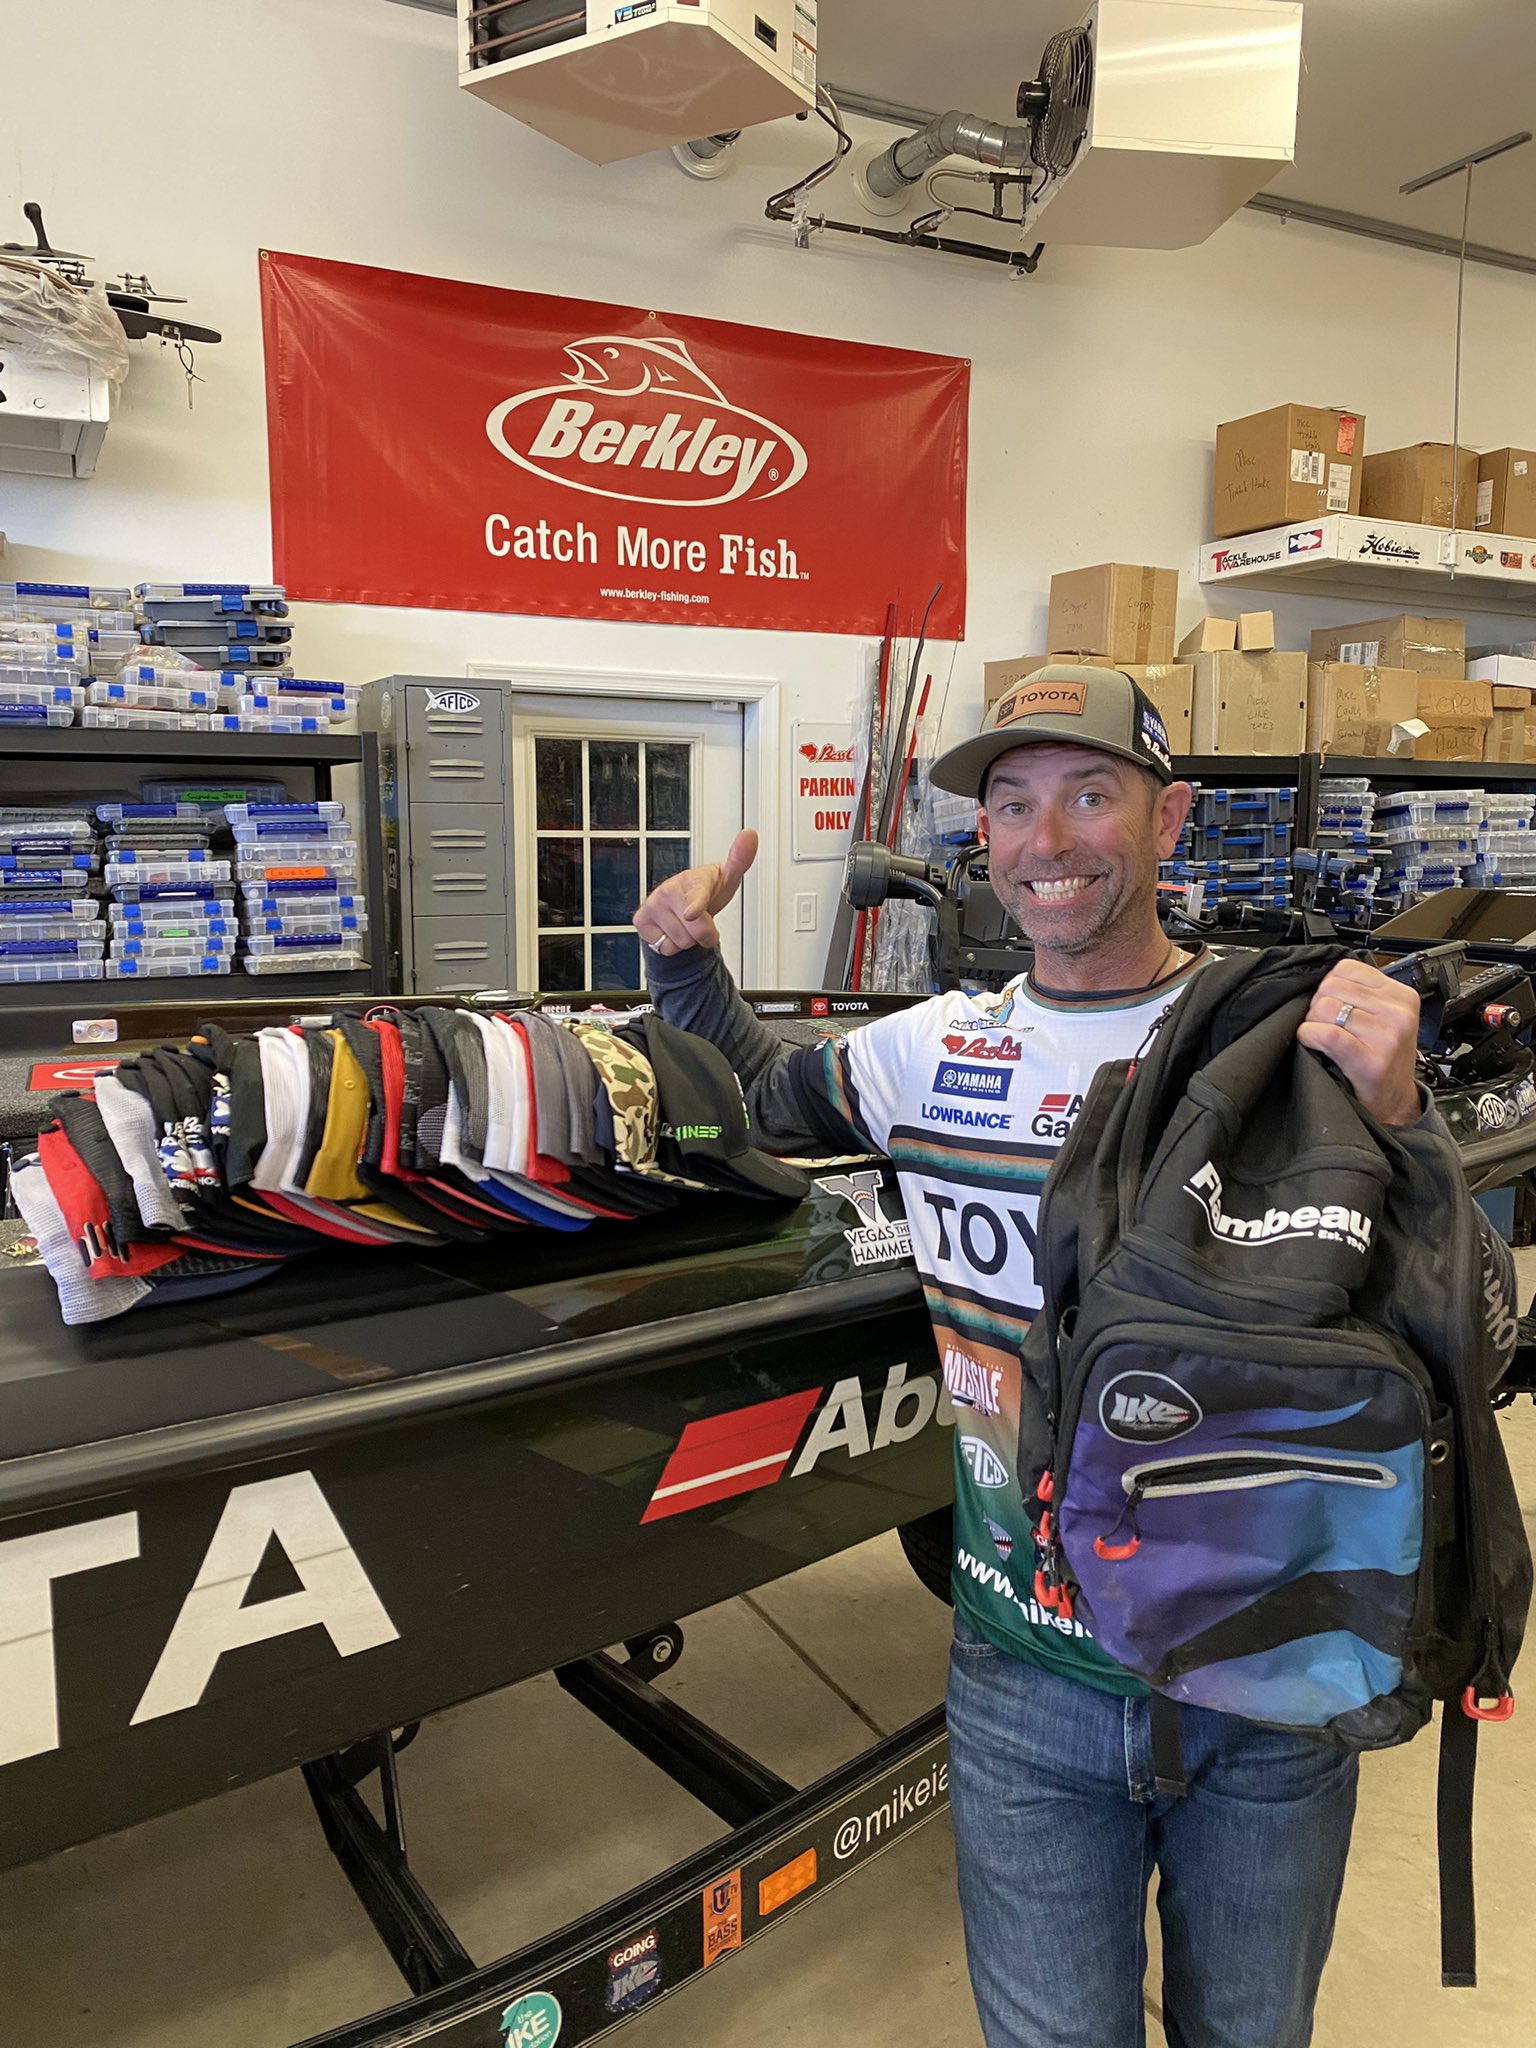 Mike “IKE” Iaconelli on X: Folks at home! This week's Manic Hat Monday is  brought to you by @flambeauout ! Like their page, comment below and you  have a chance to have